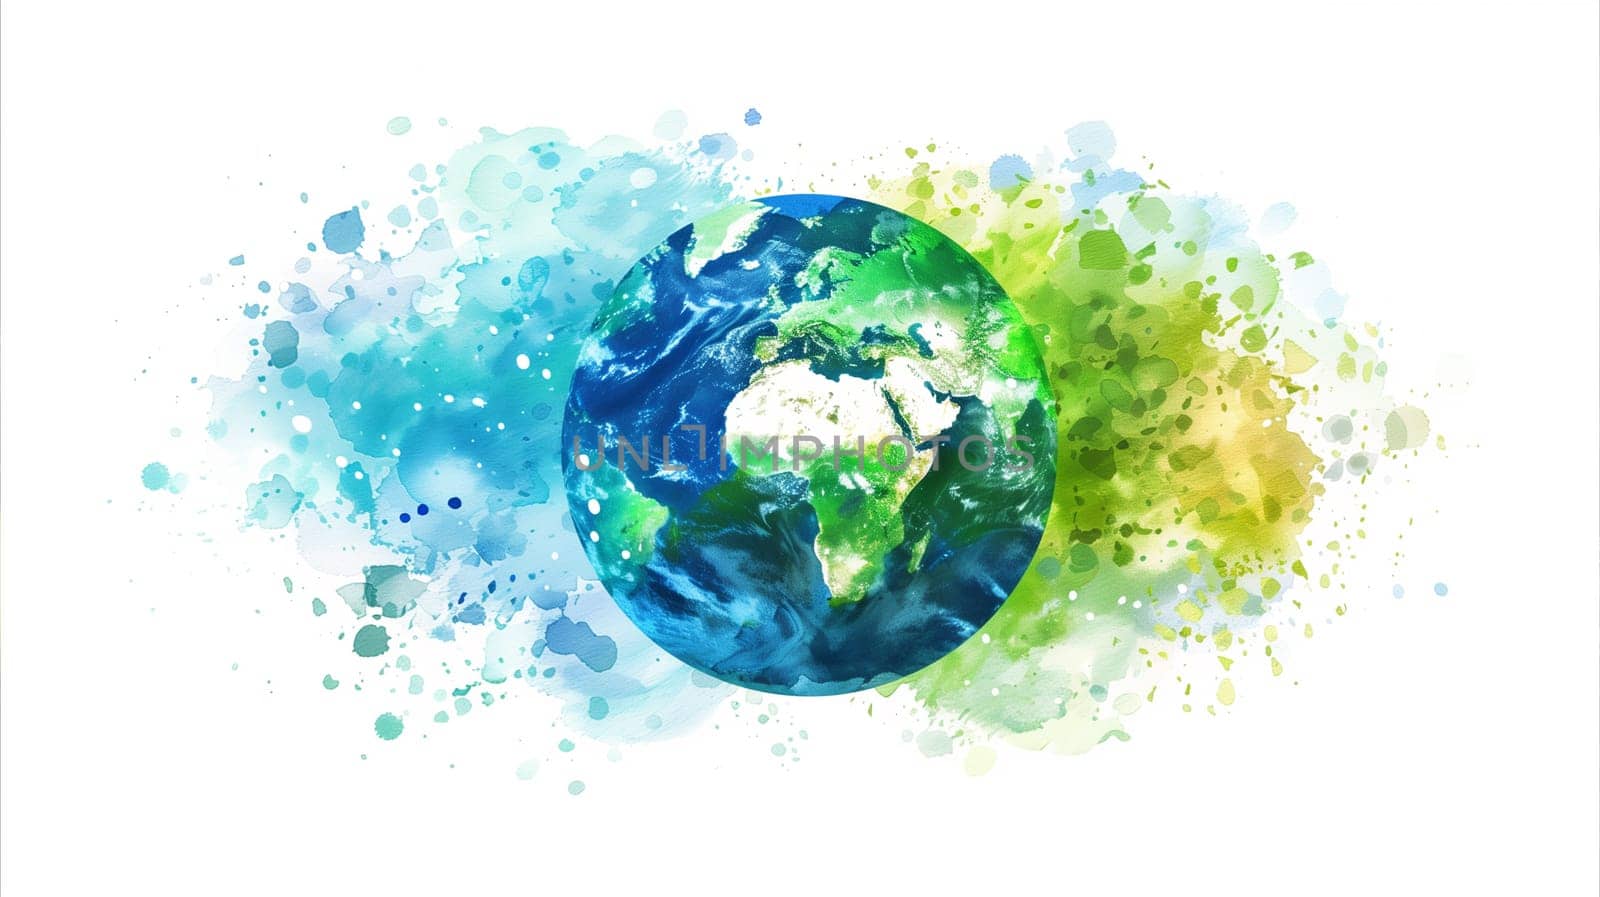 Vibrant Watercolor Painting of Earth by Sd28DimoN_1976